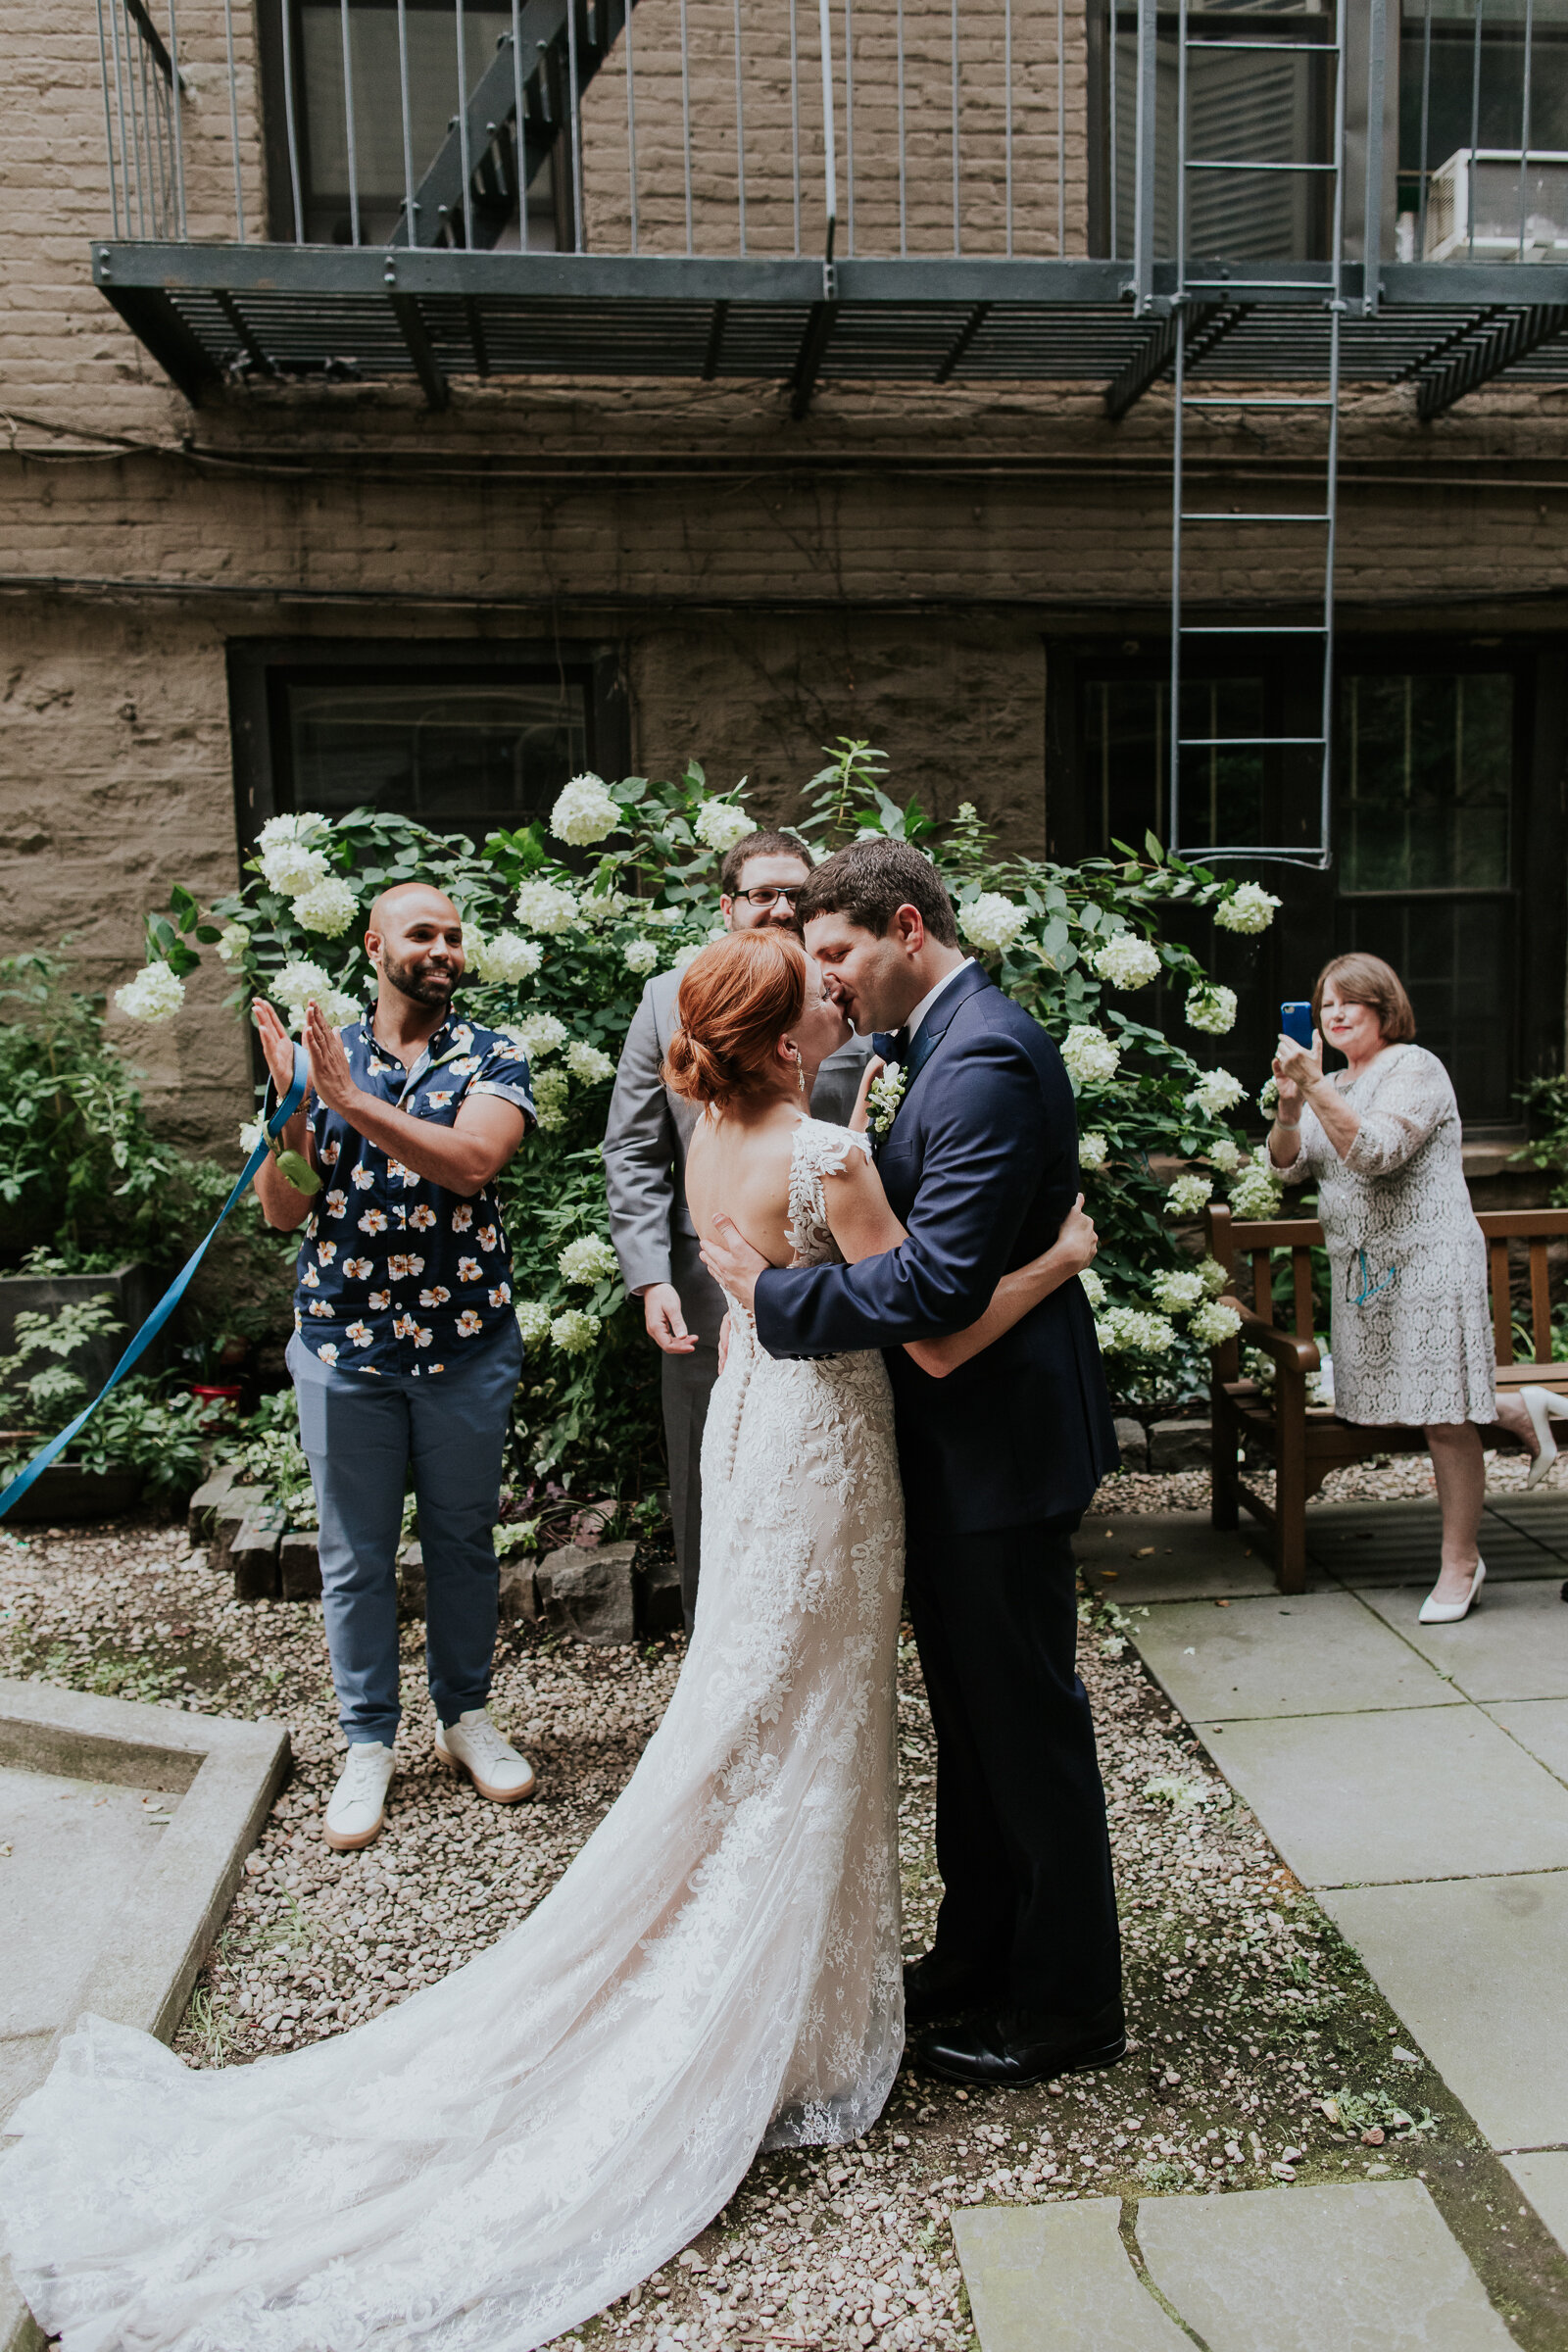 Yes, they actually had a fire escape in the background during their ceremony and I am here for it!